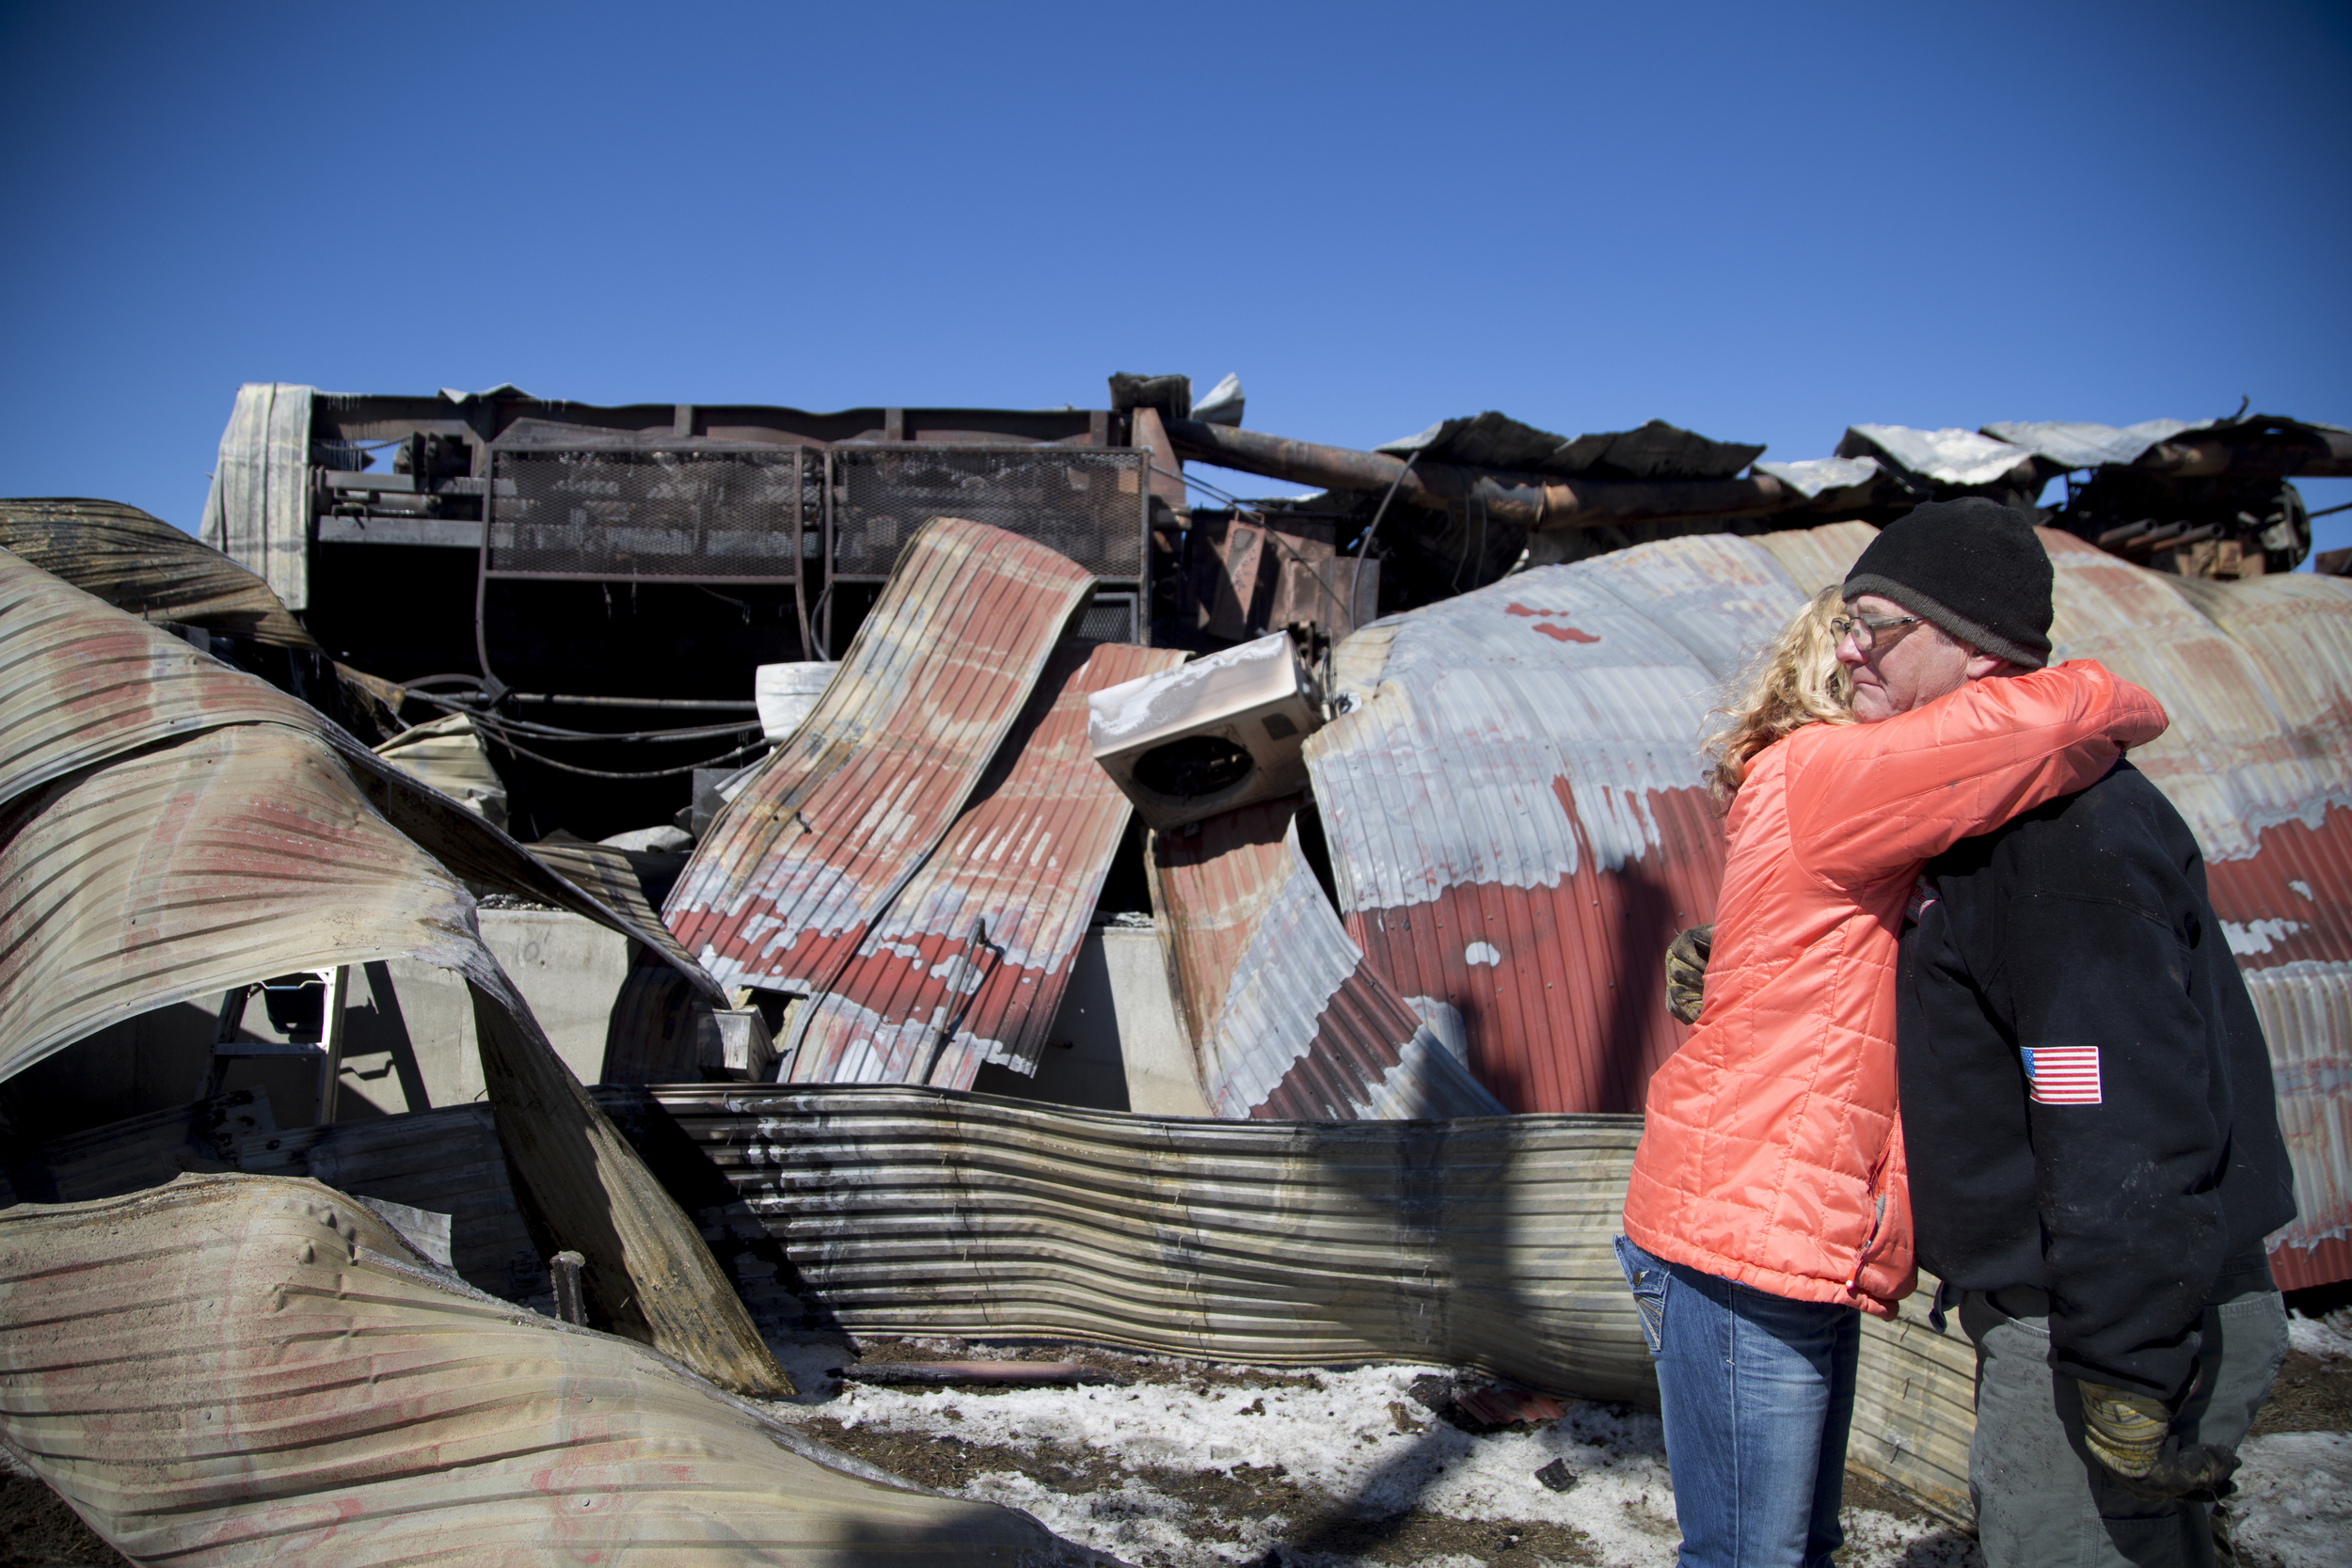  Safety and Permits Compliance Officer Becky Eastman, of Fairlee, Vt., embraces Sawmill Dry Kiln Manager Tom Fulton, also of Fairlee, Vt., by the remains of the sawmill building at Britton Lumber Company in Fairlee, Vt., on Sunday, March 29, 2015. "I